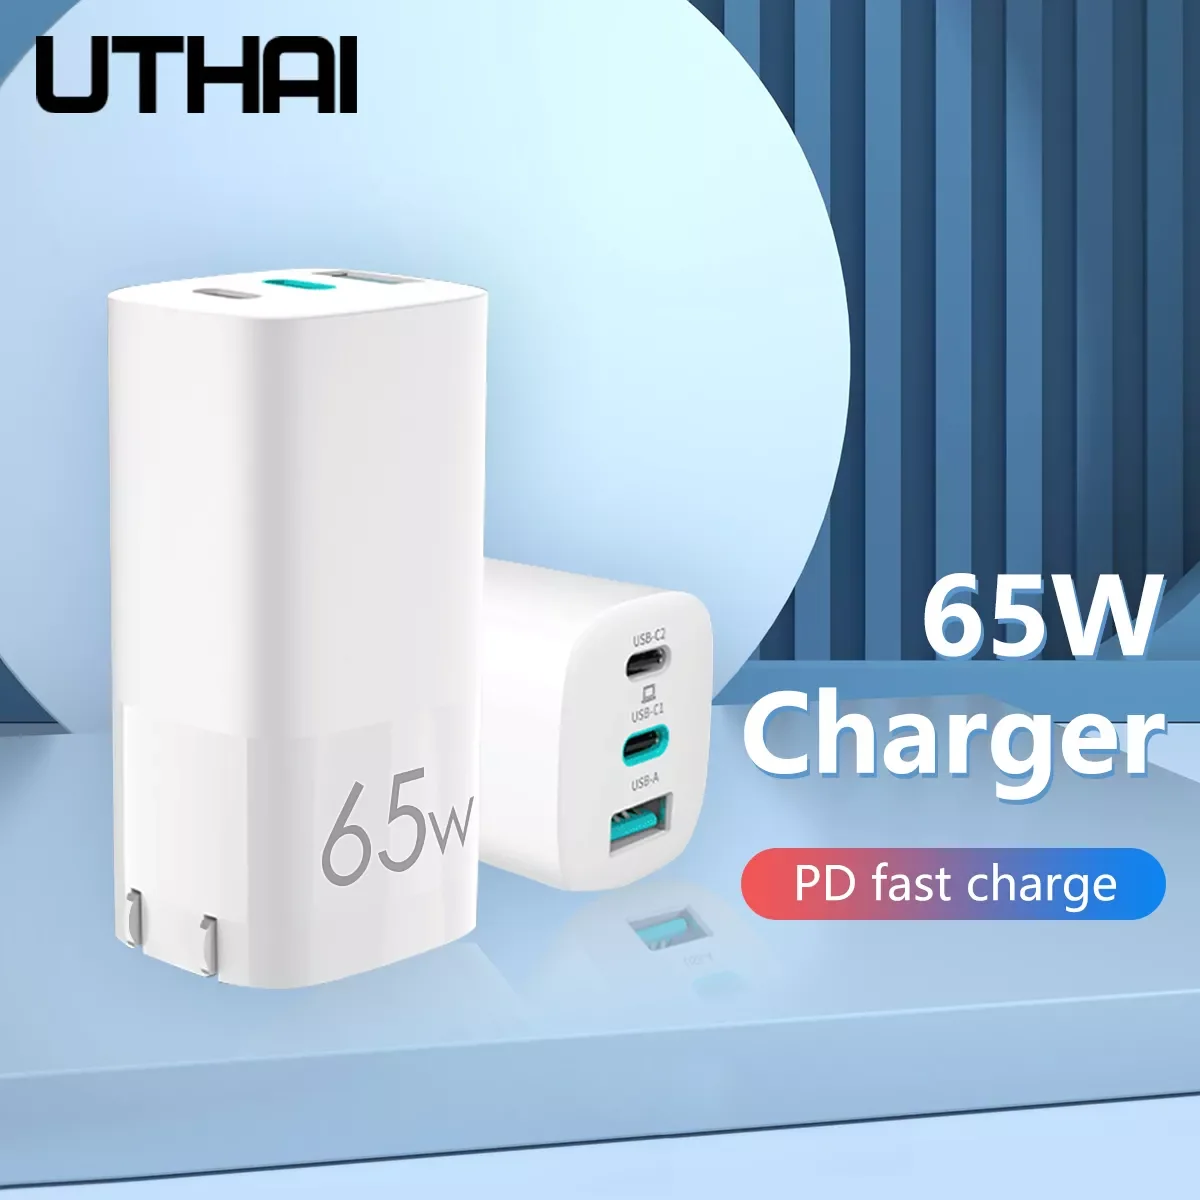 

NEW Gallium Nitride Charger PD Fast Charge Mobile Phone Charger GaN Fast Charger Three Ports Direct Charge Support iphone 11~13